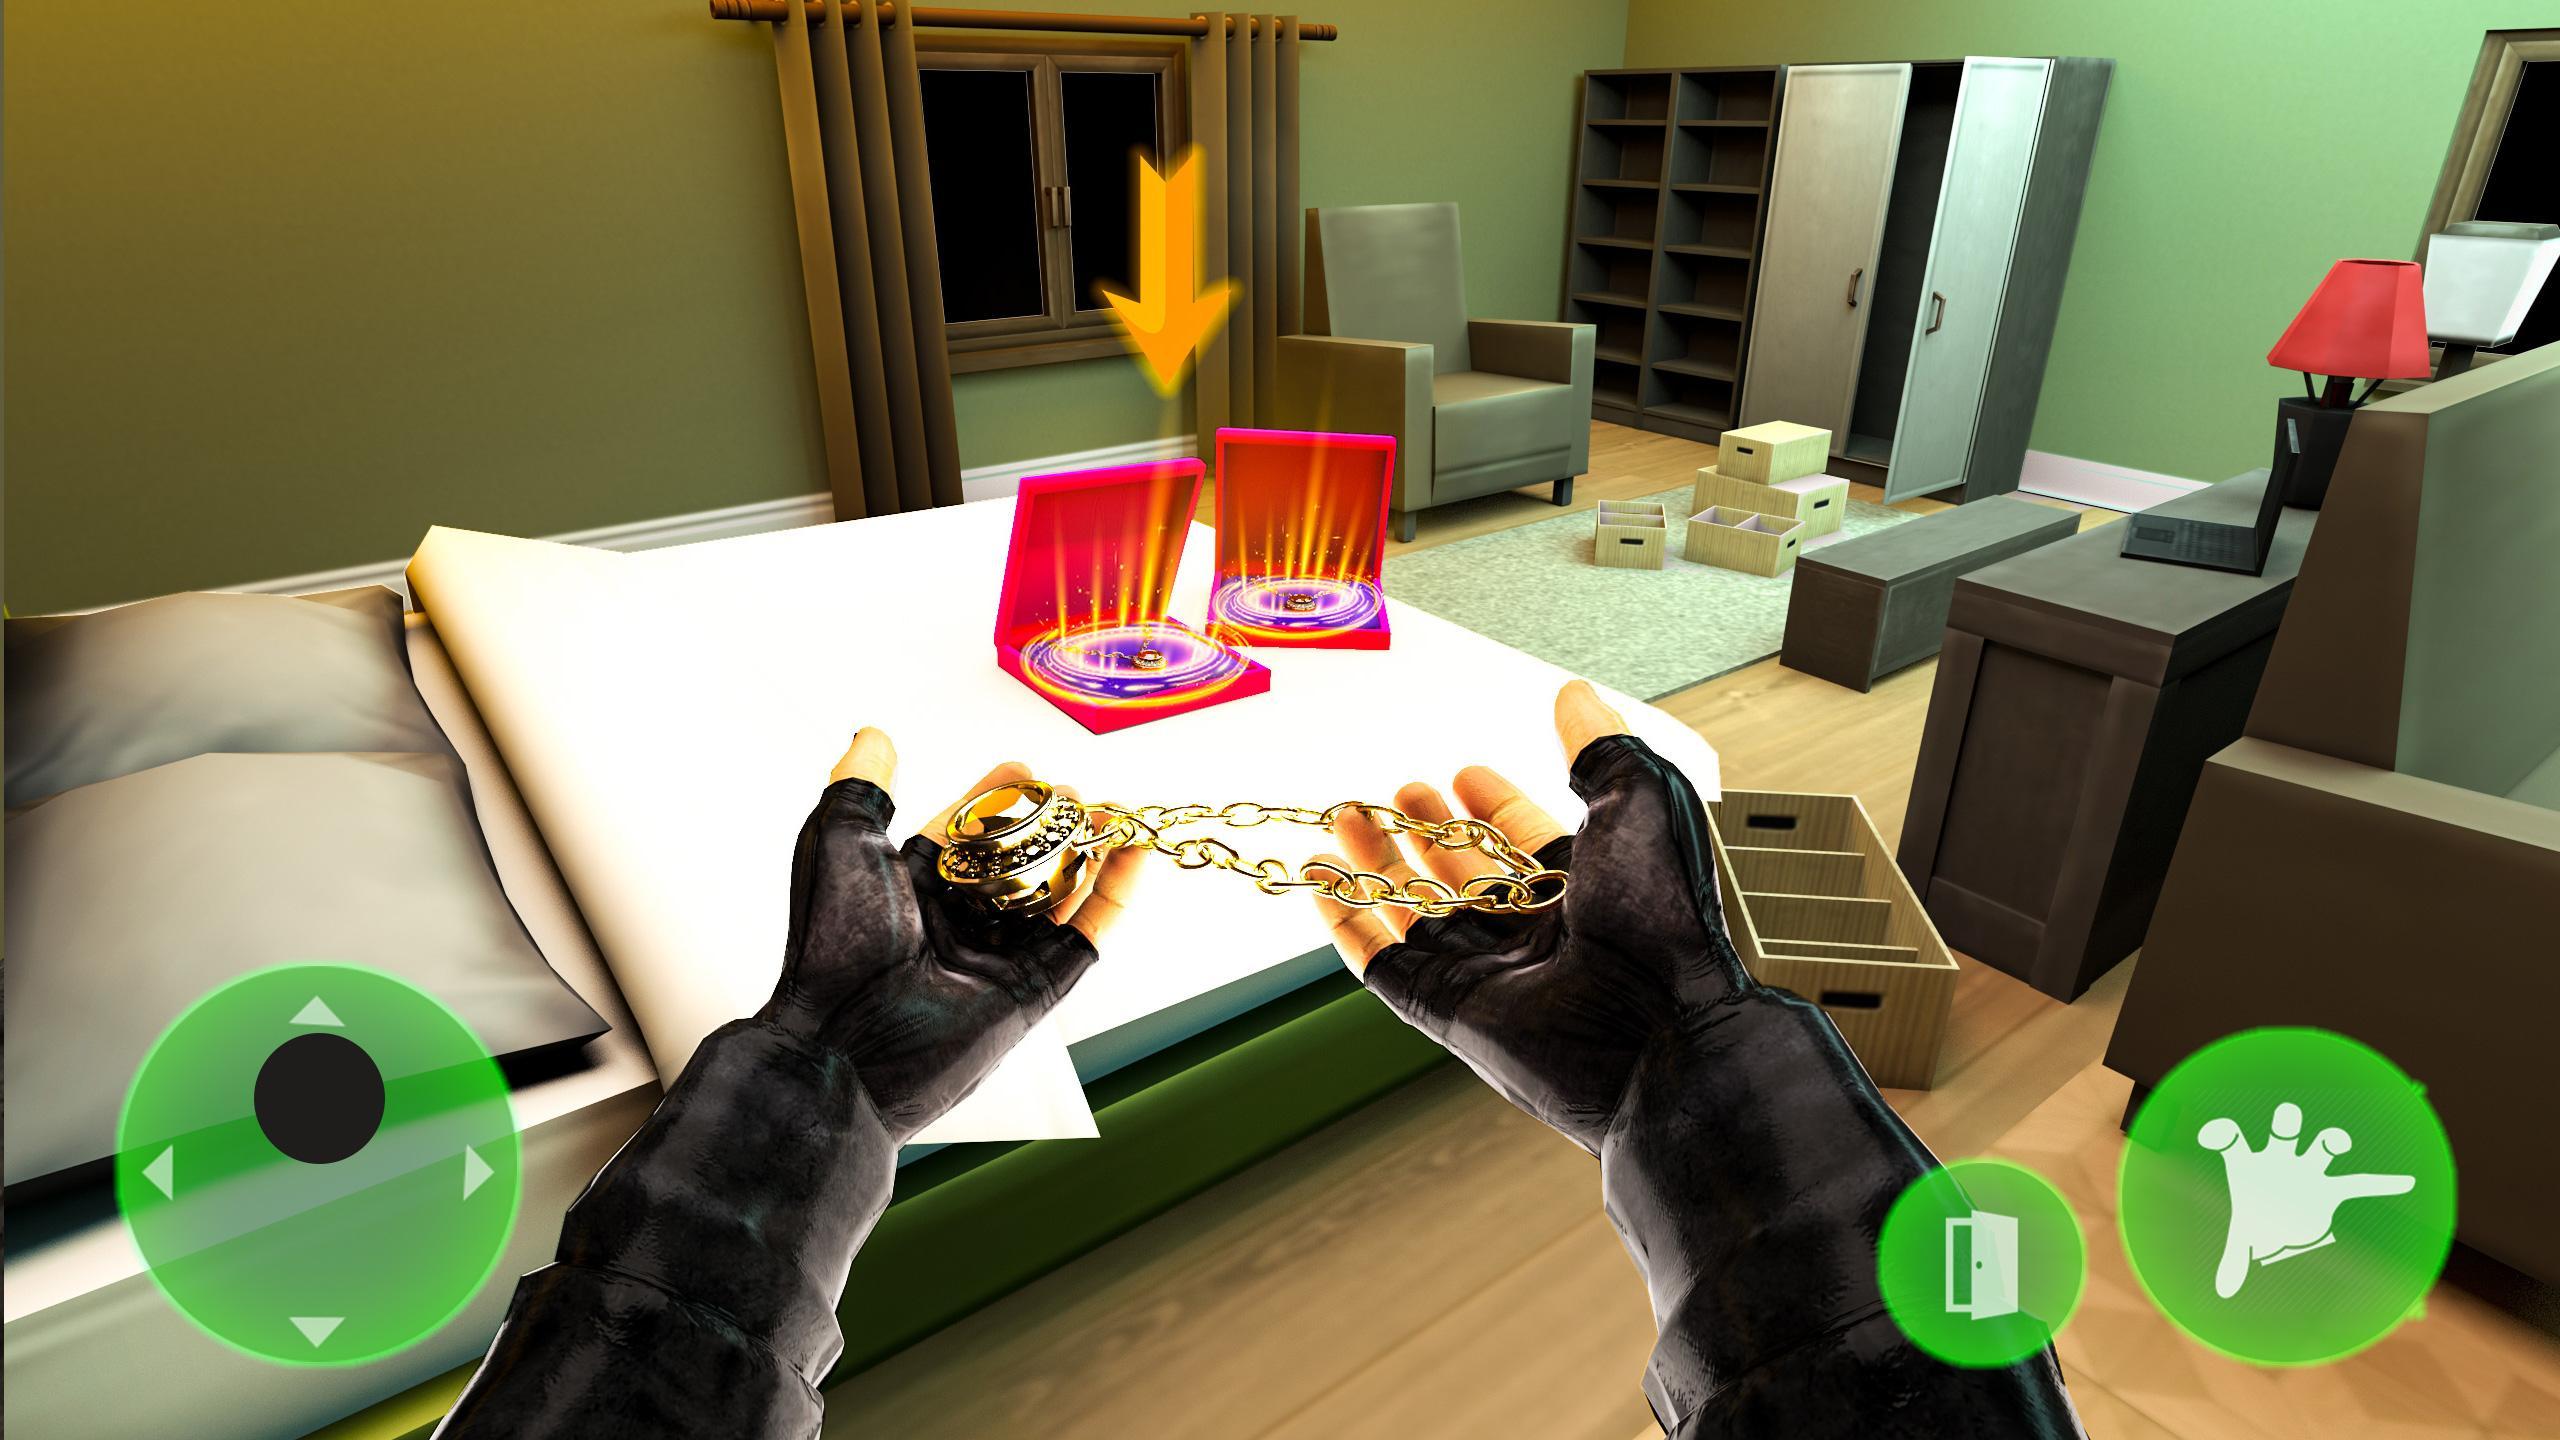 City Bank Robbery Thief Simulator Cops Sneak Game2 For Android